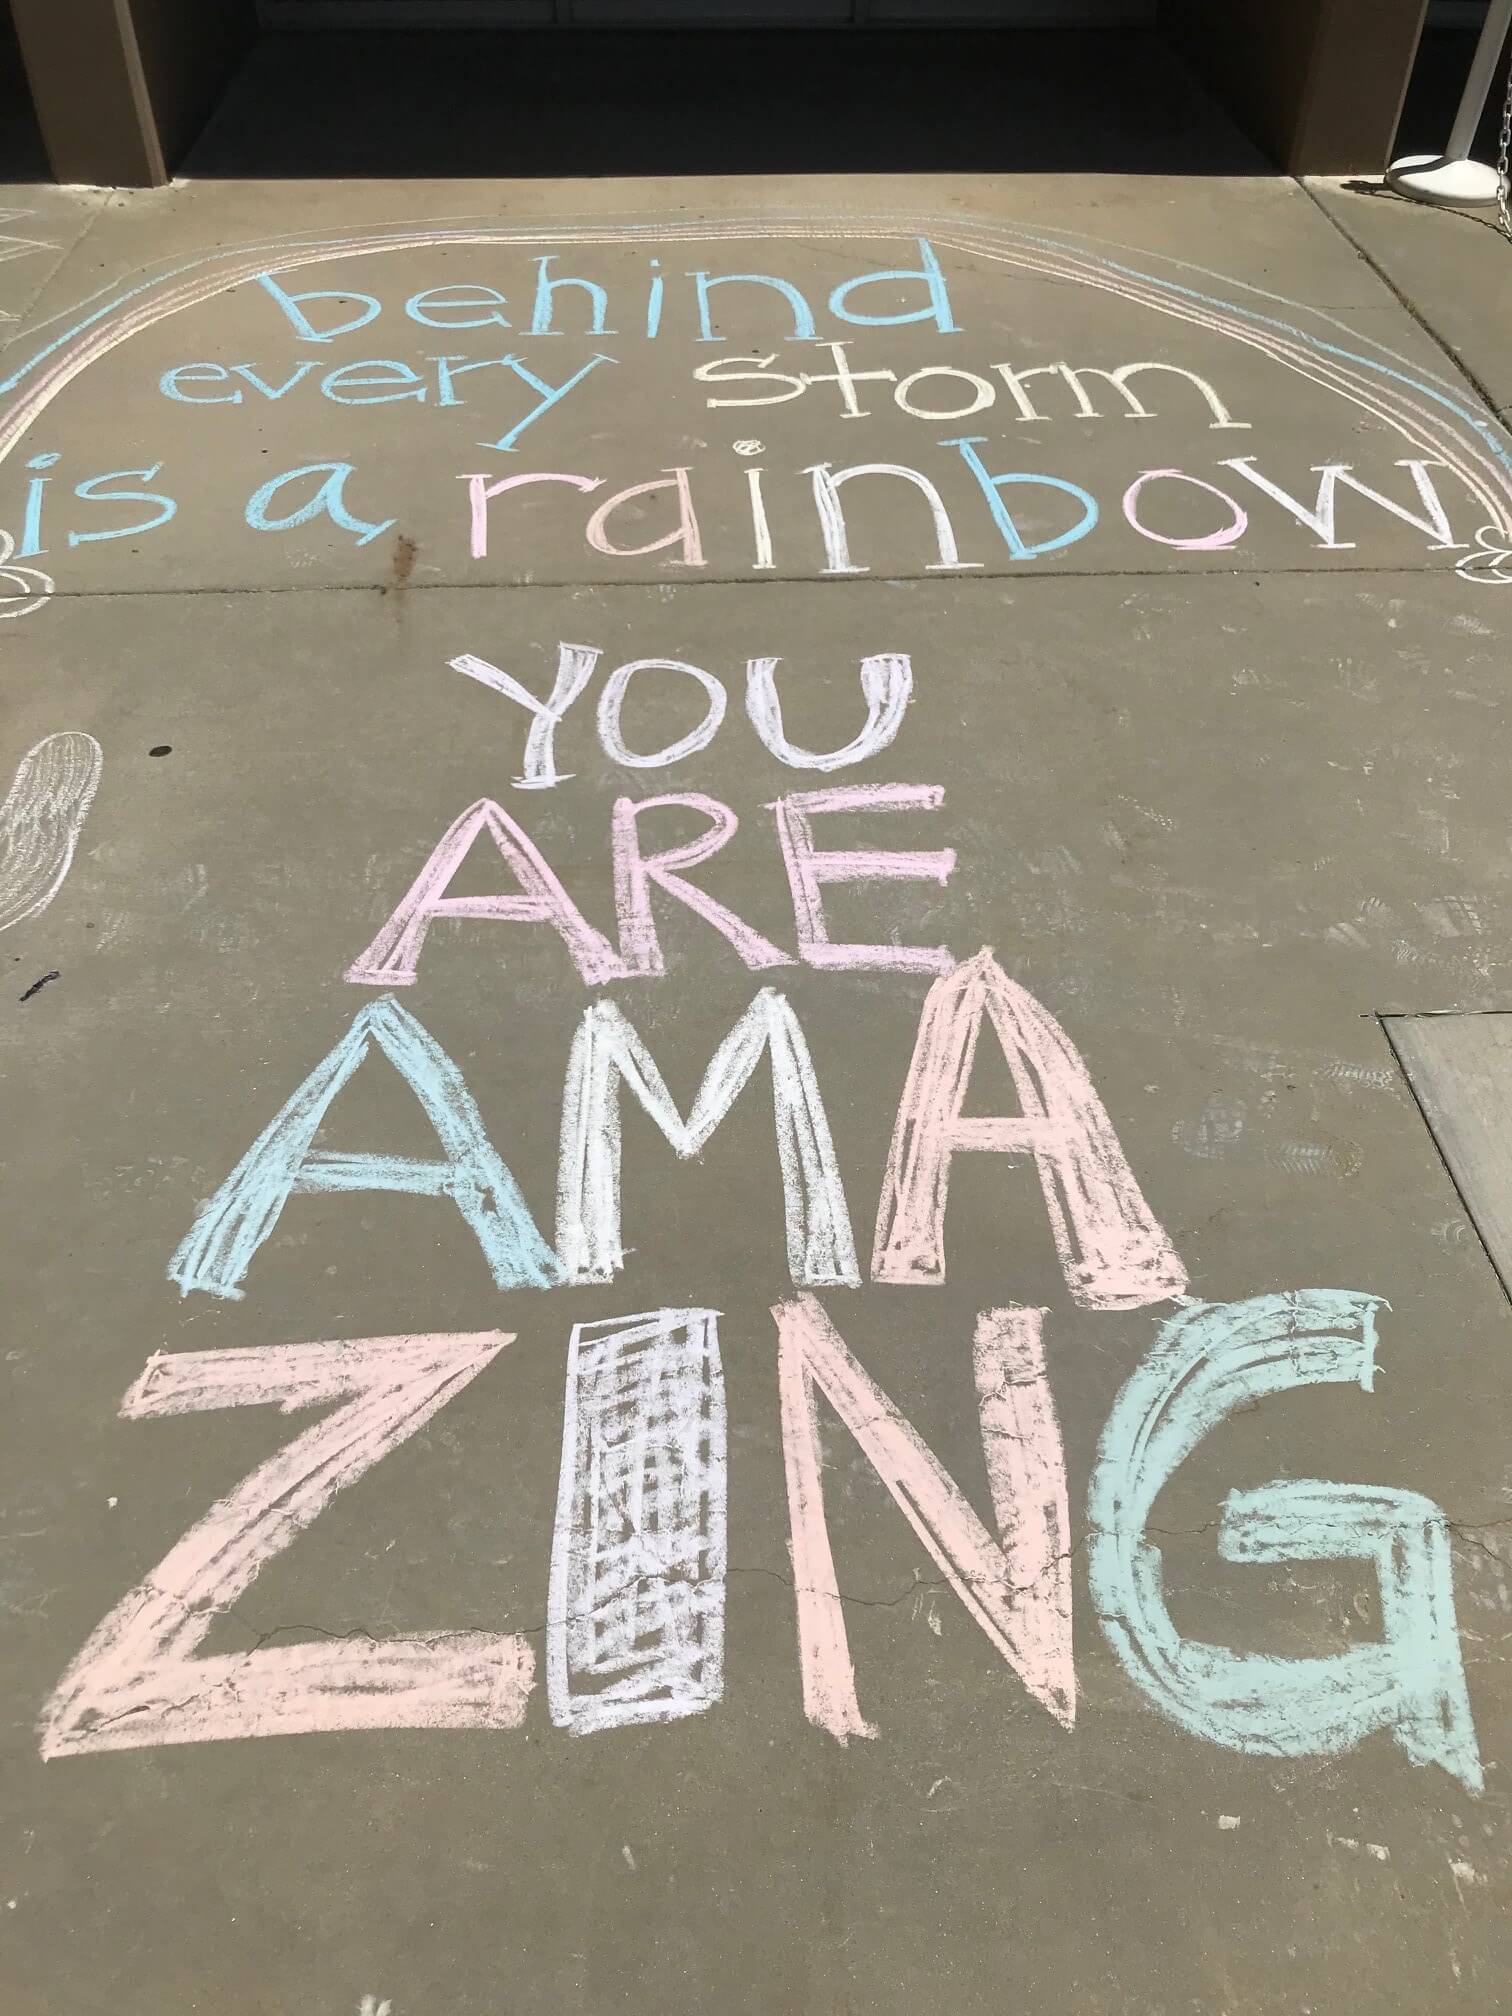 Chalk drawing that says "behind every storm is a rainbow you are amazing"